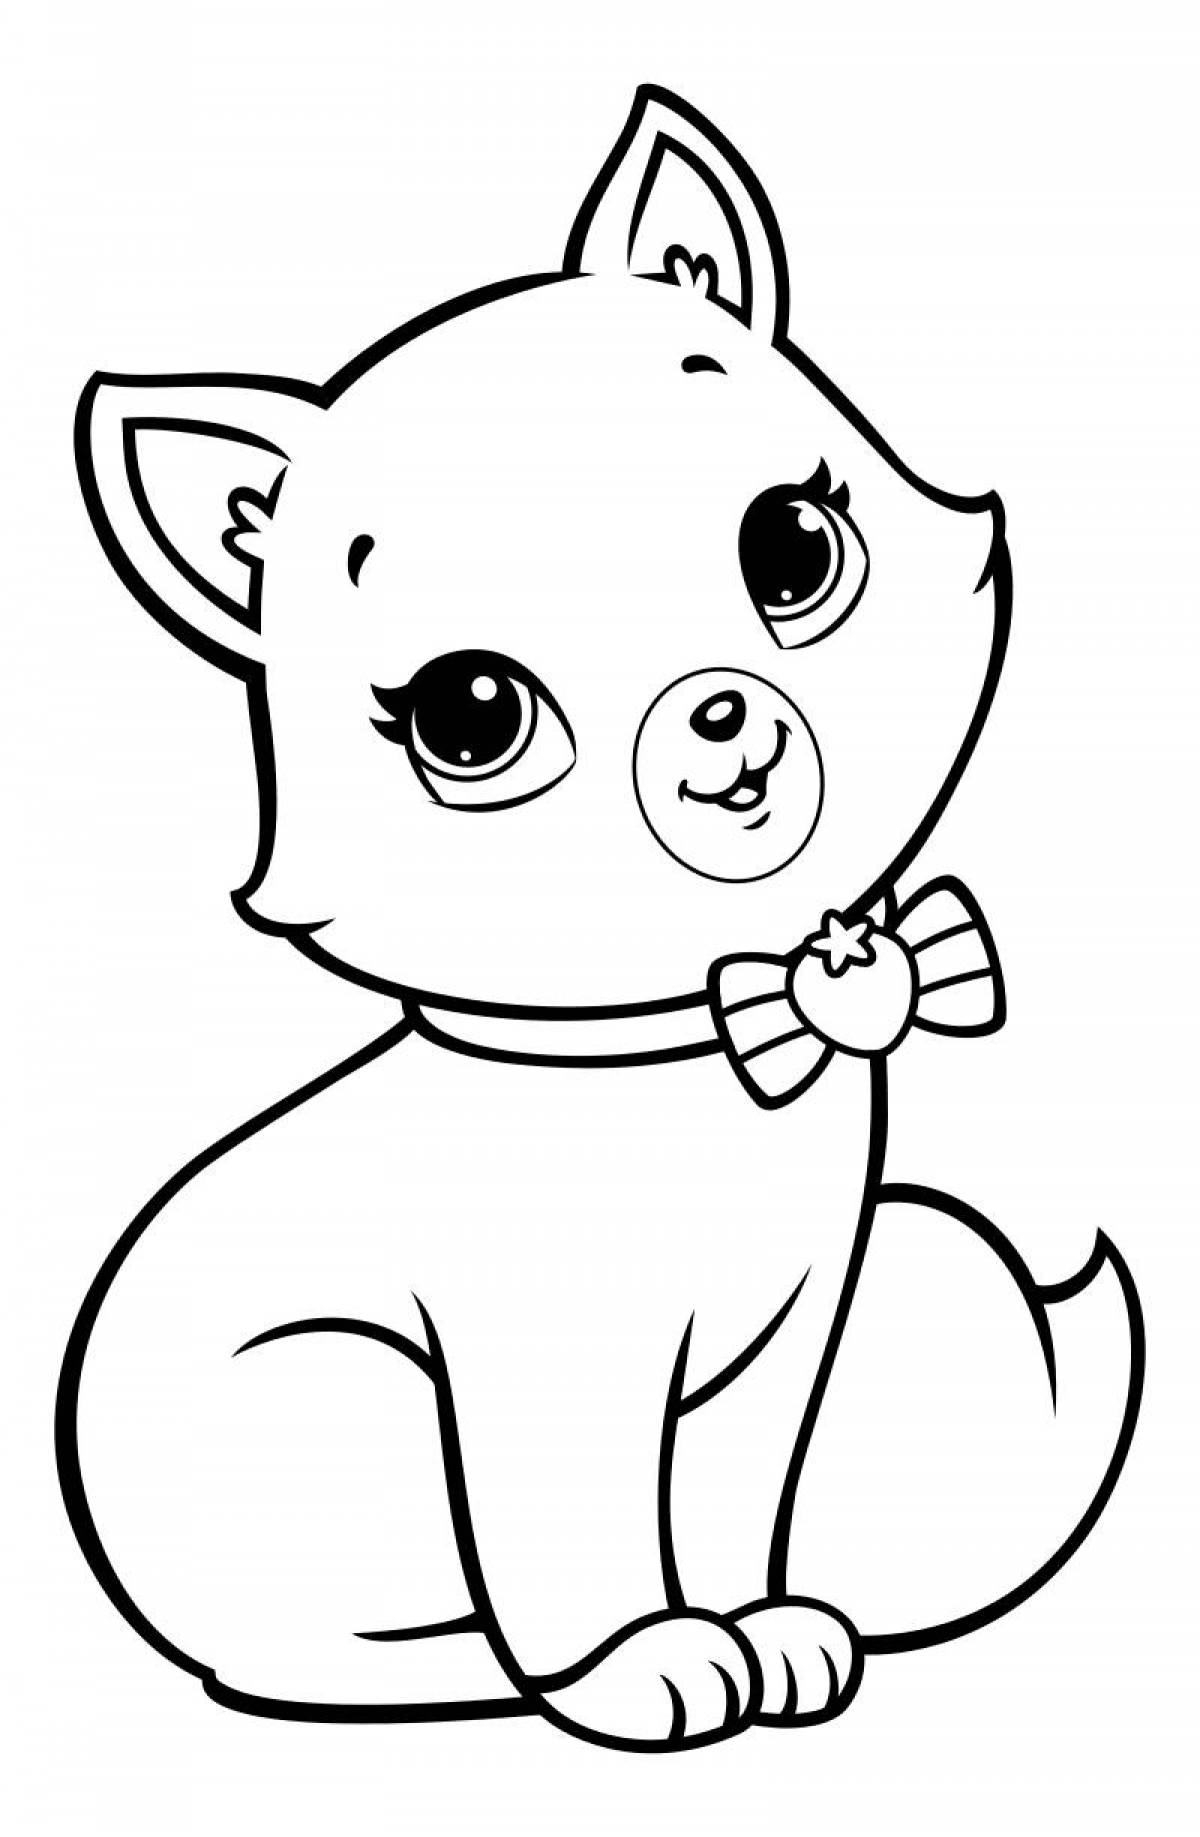 Big-eared coloring pages dogs kittens for kids